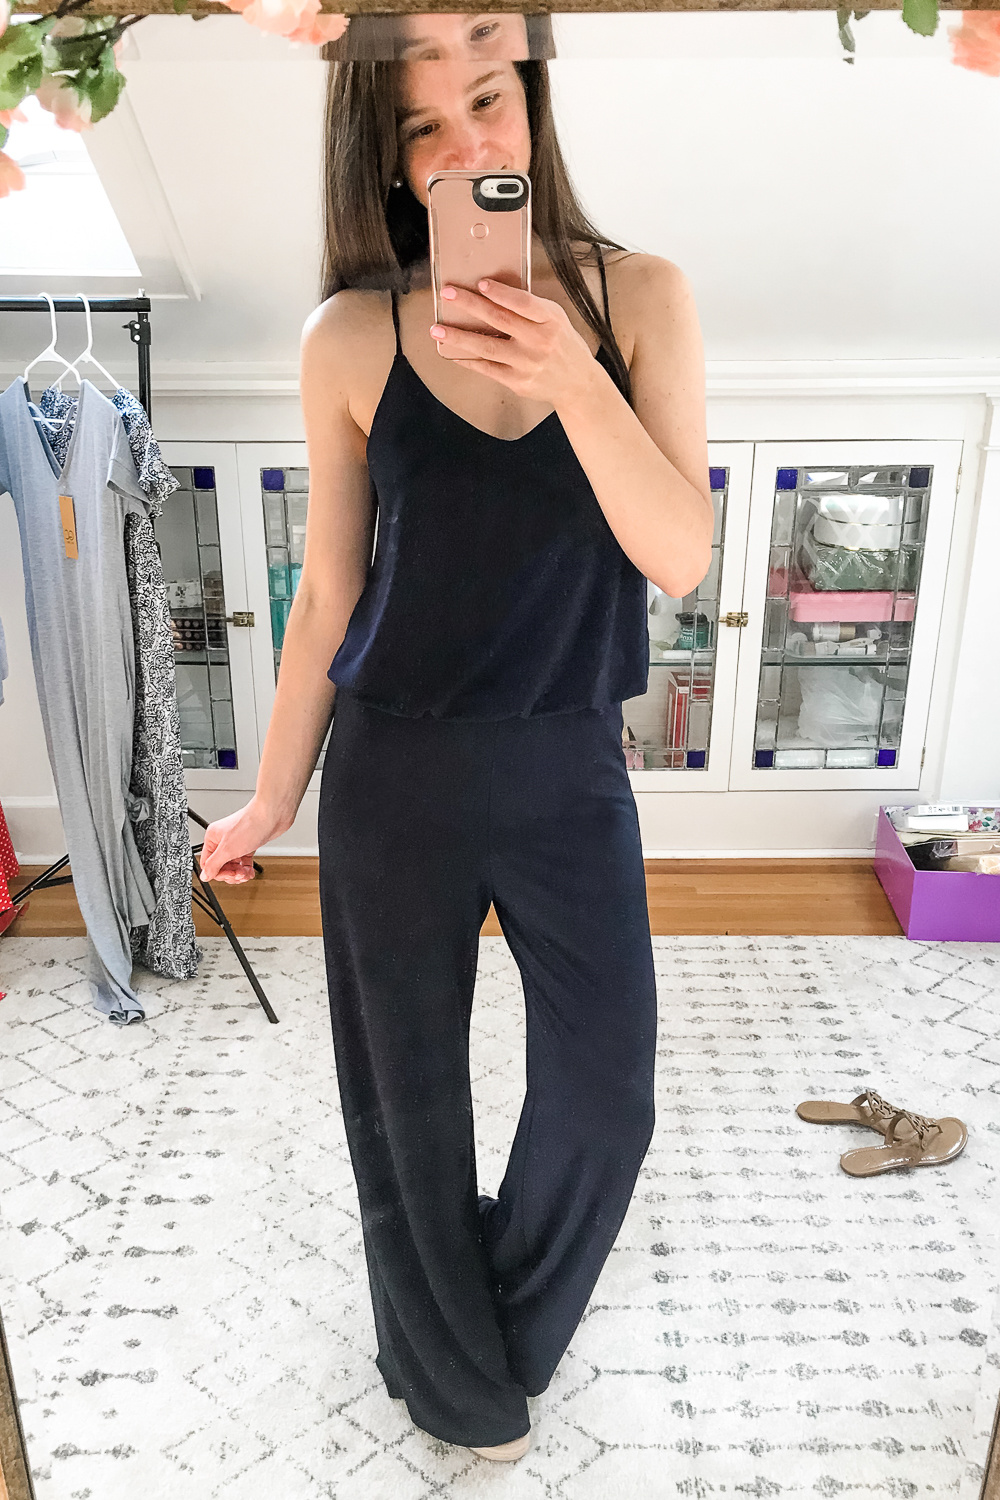 Navy Urban K Racer Back Jumpsuit on Amazon, Amazon Summer Try-On Haul and Style Picks by popular affordable fashion blogger Stephanie Ziajka from Diary of a Debutante